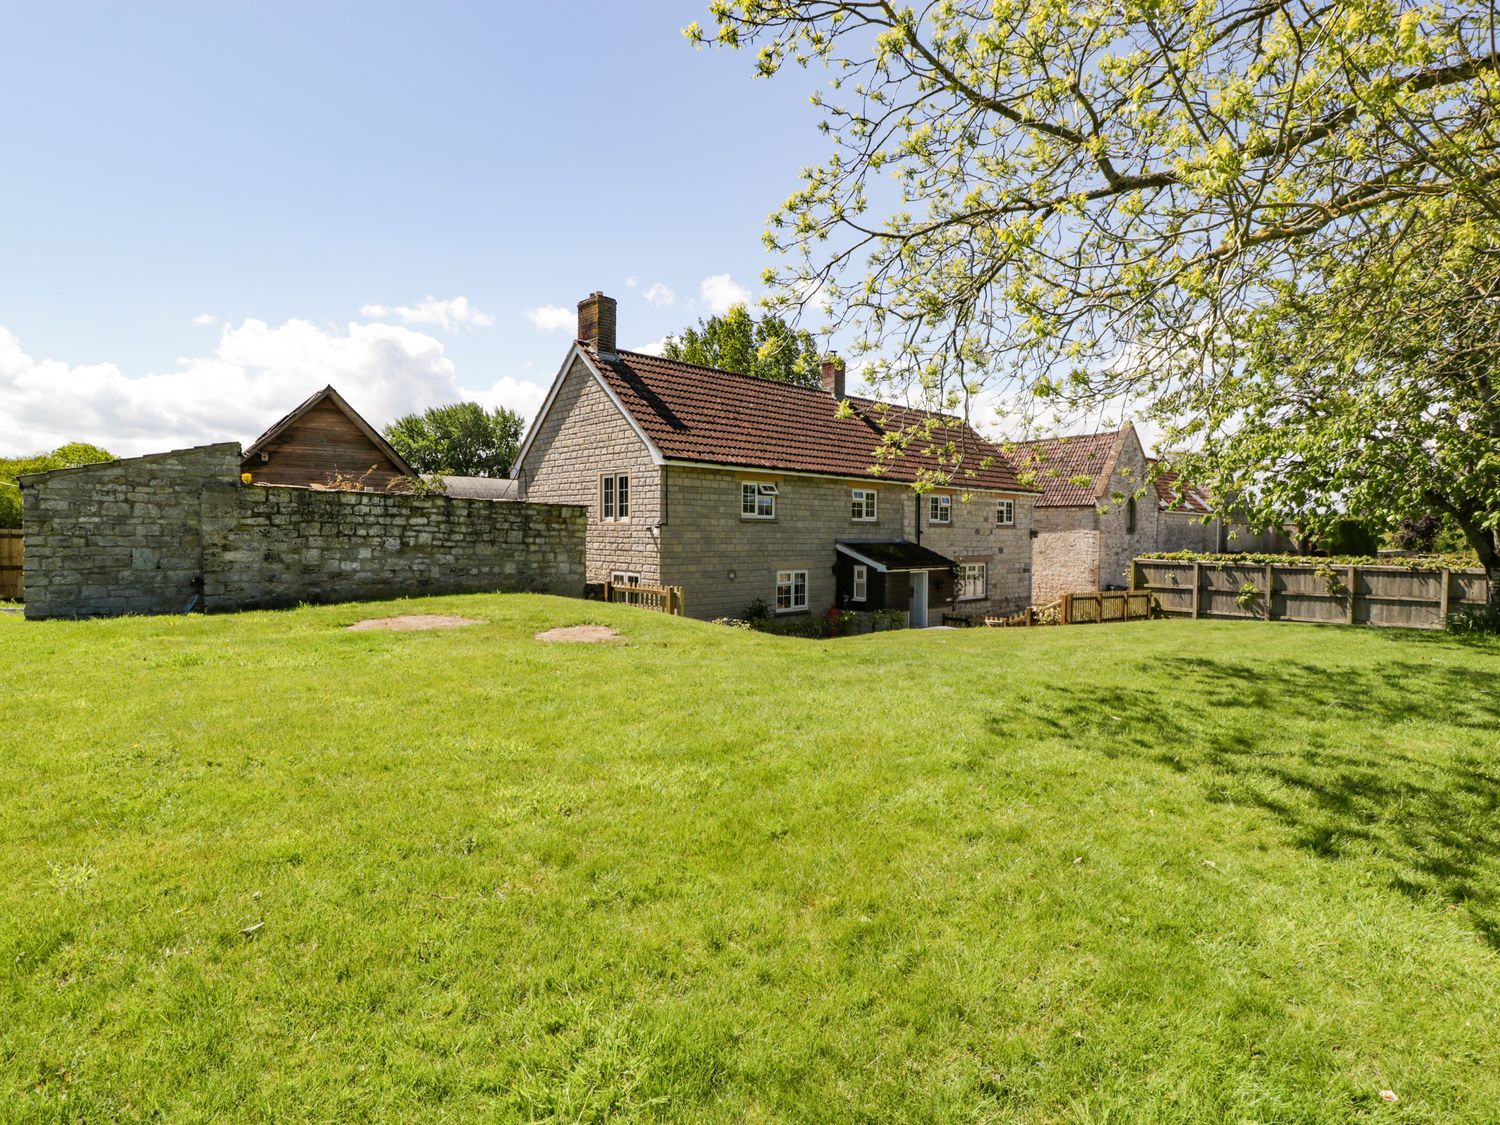 The Stable House, Mudford